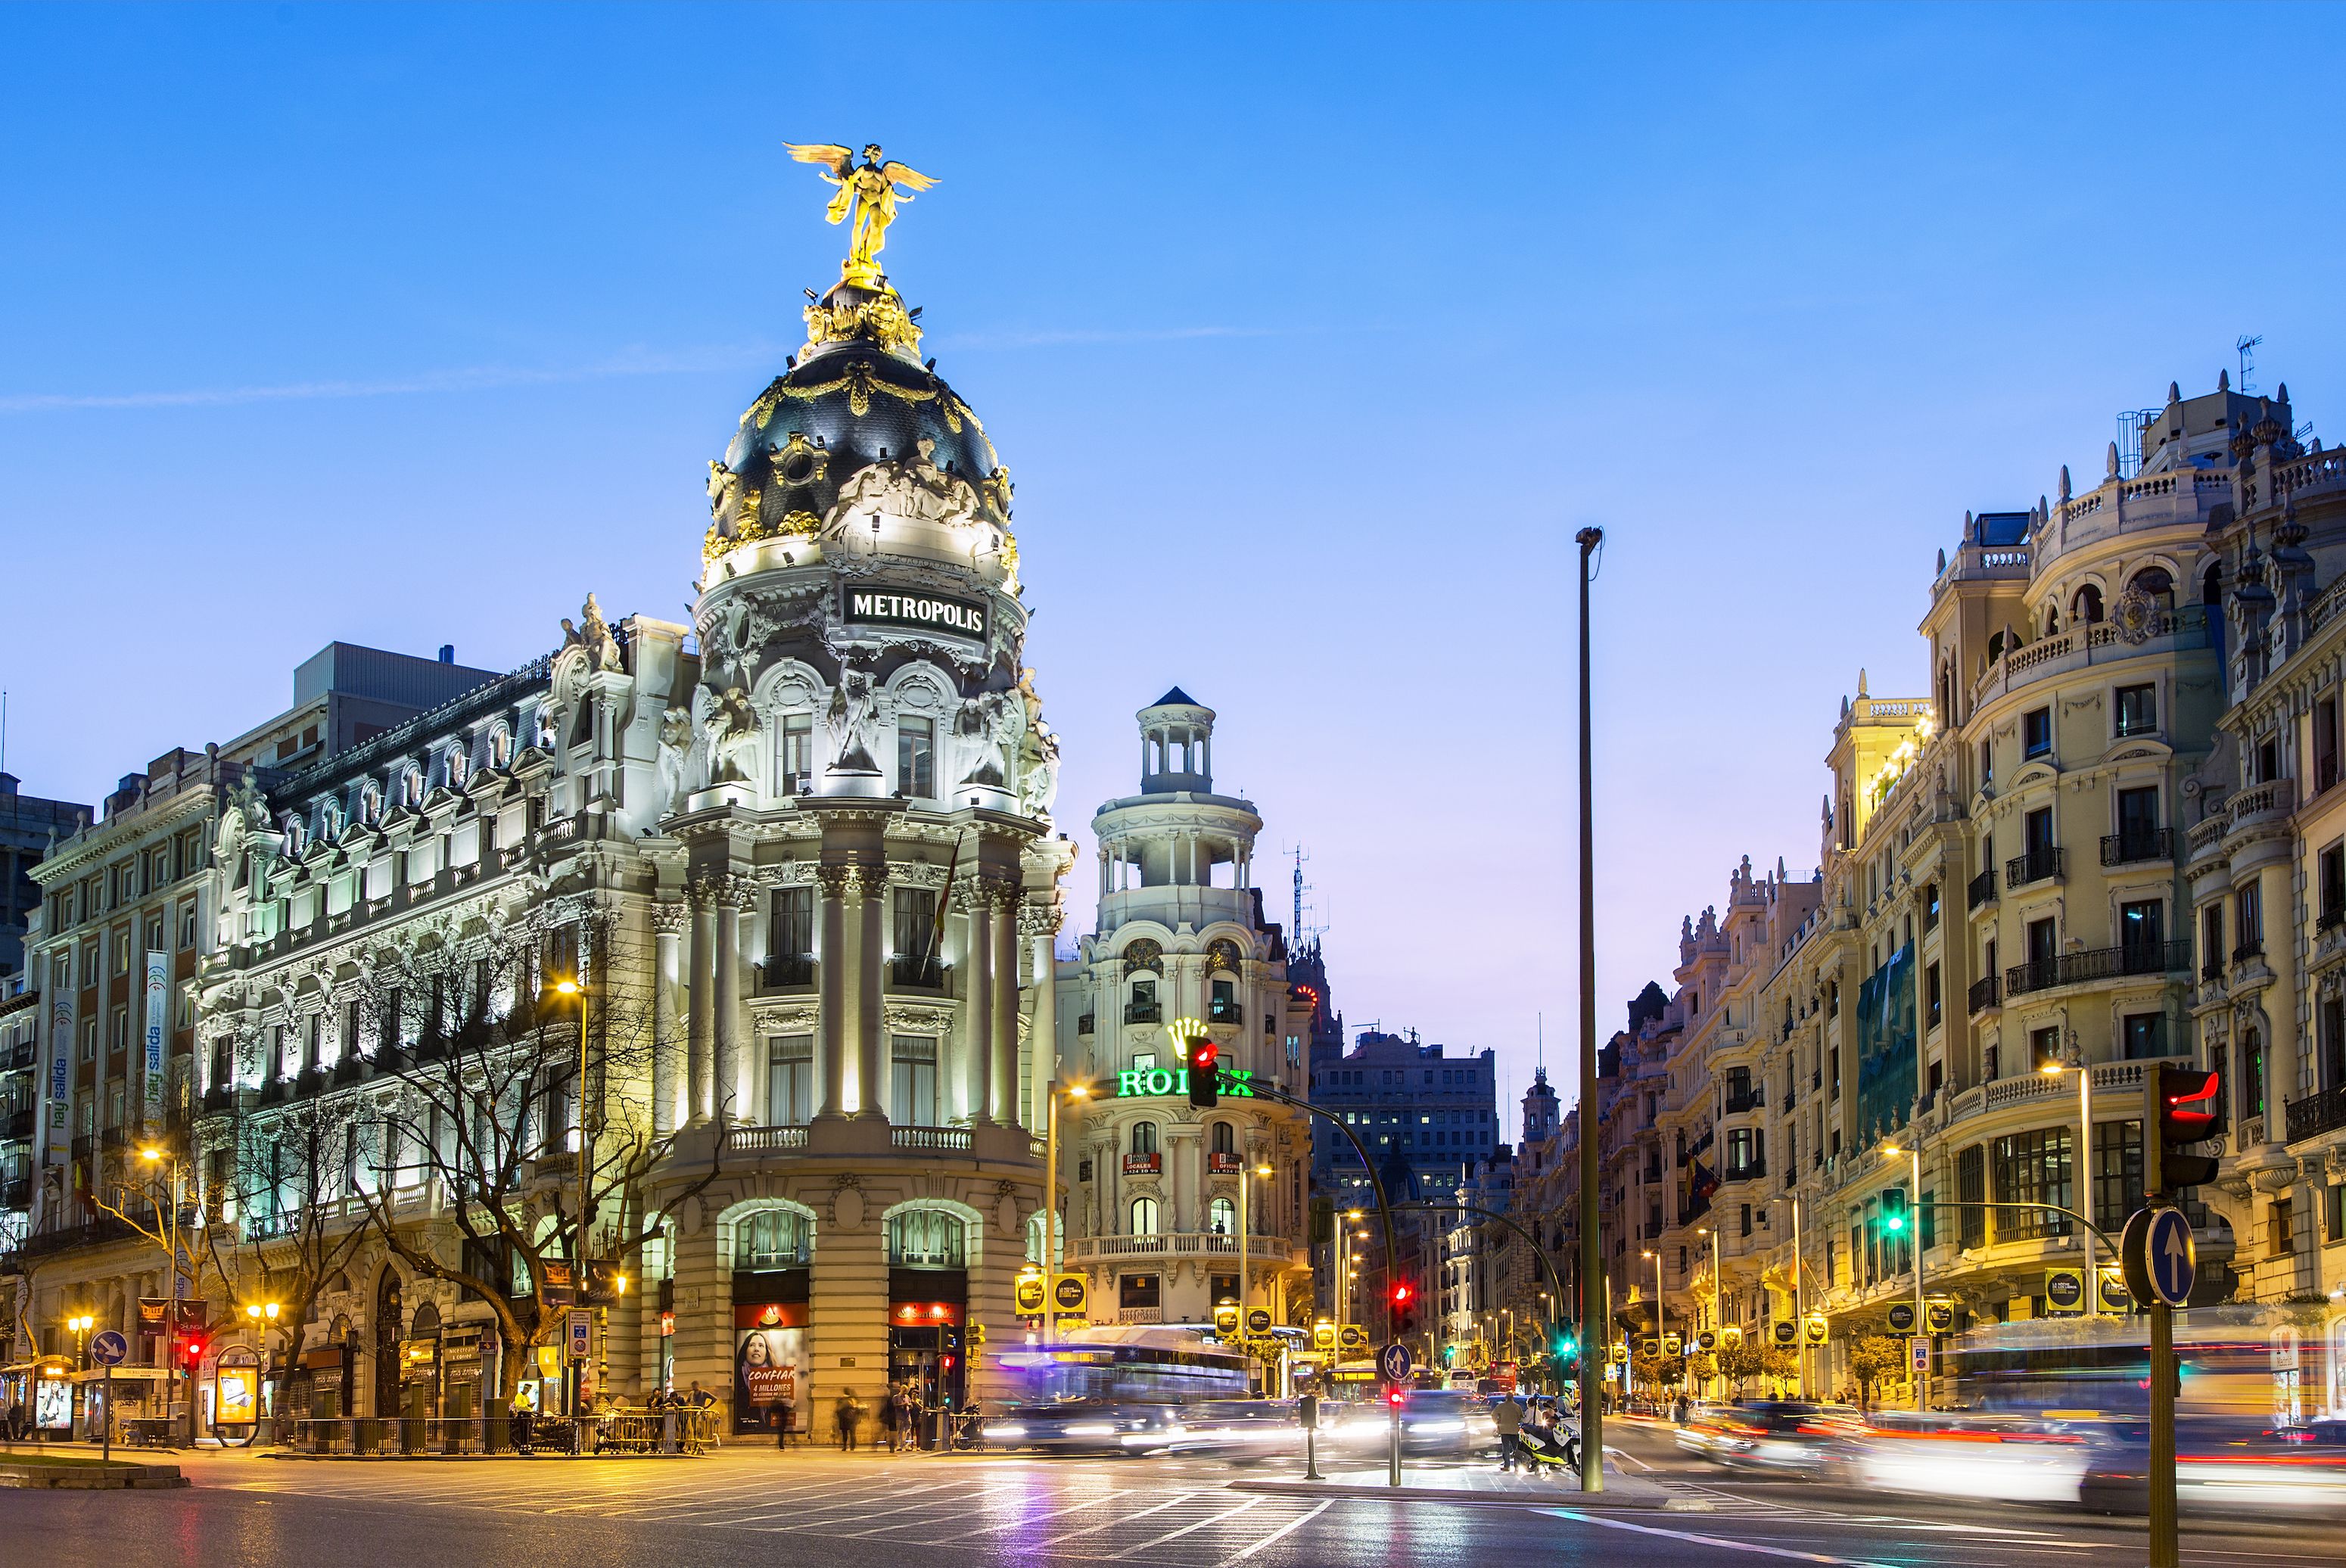 Madrid city guide: Where to eat, drink, shop and stay in the